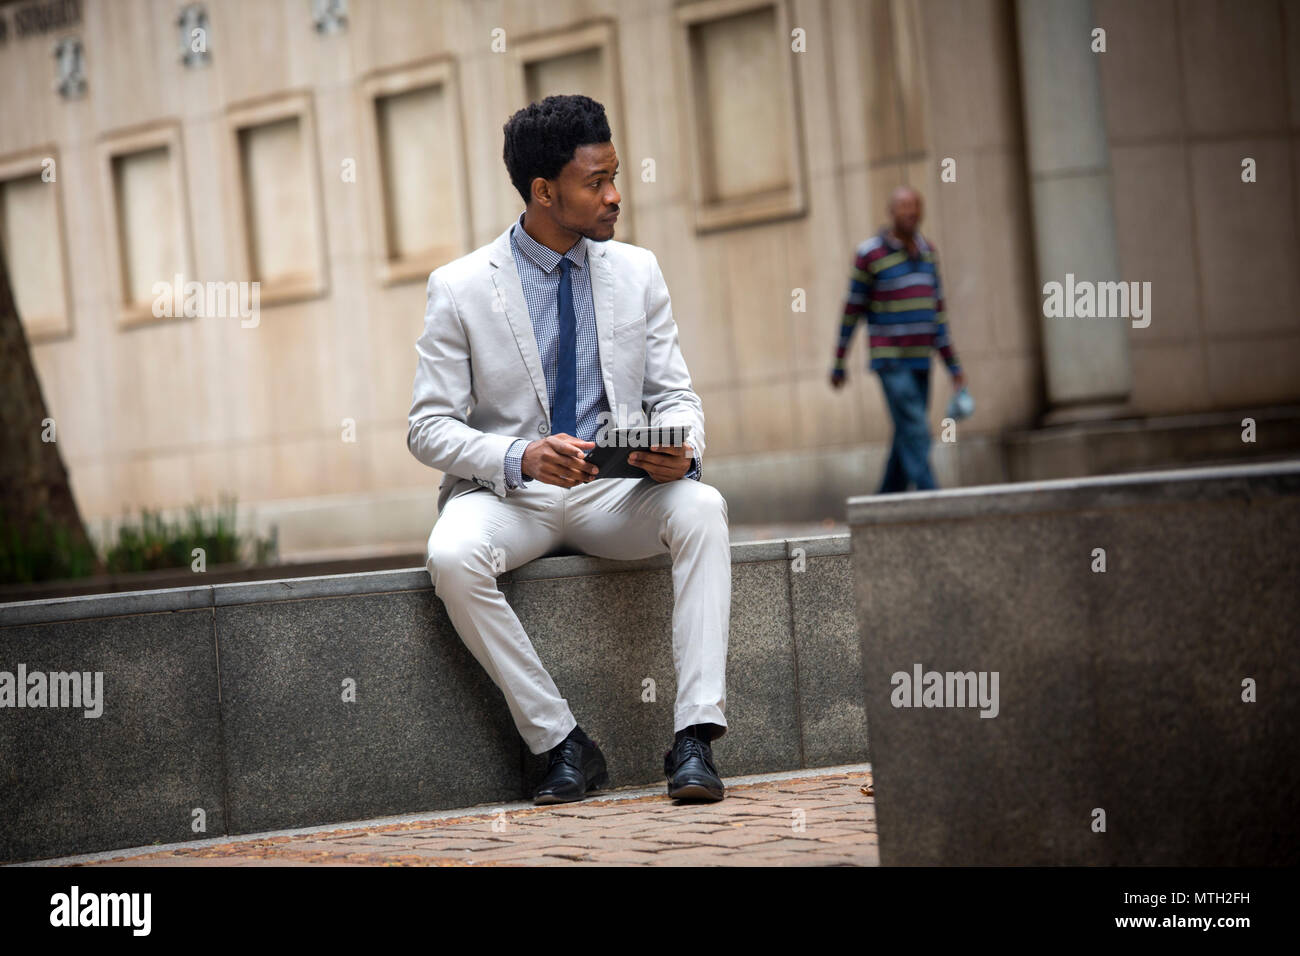 Business man working on tablet Stock Photo